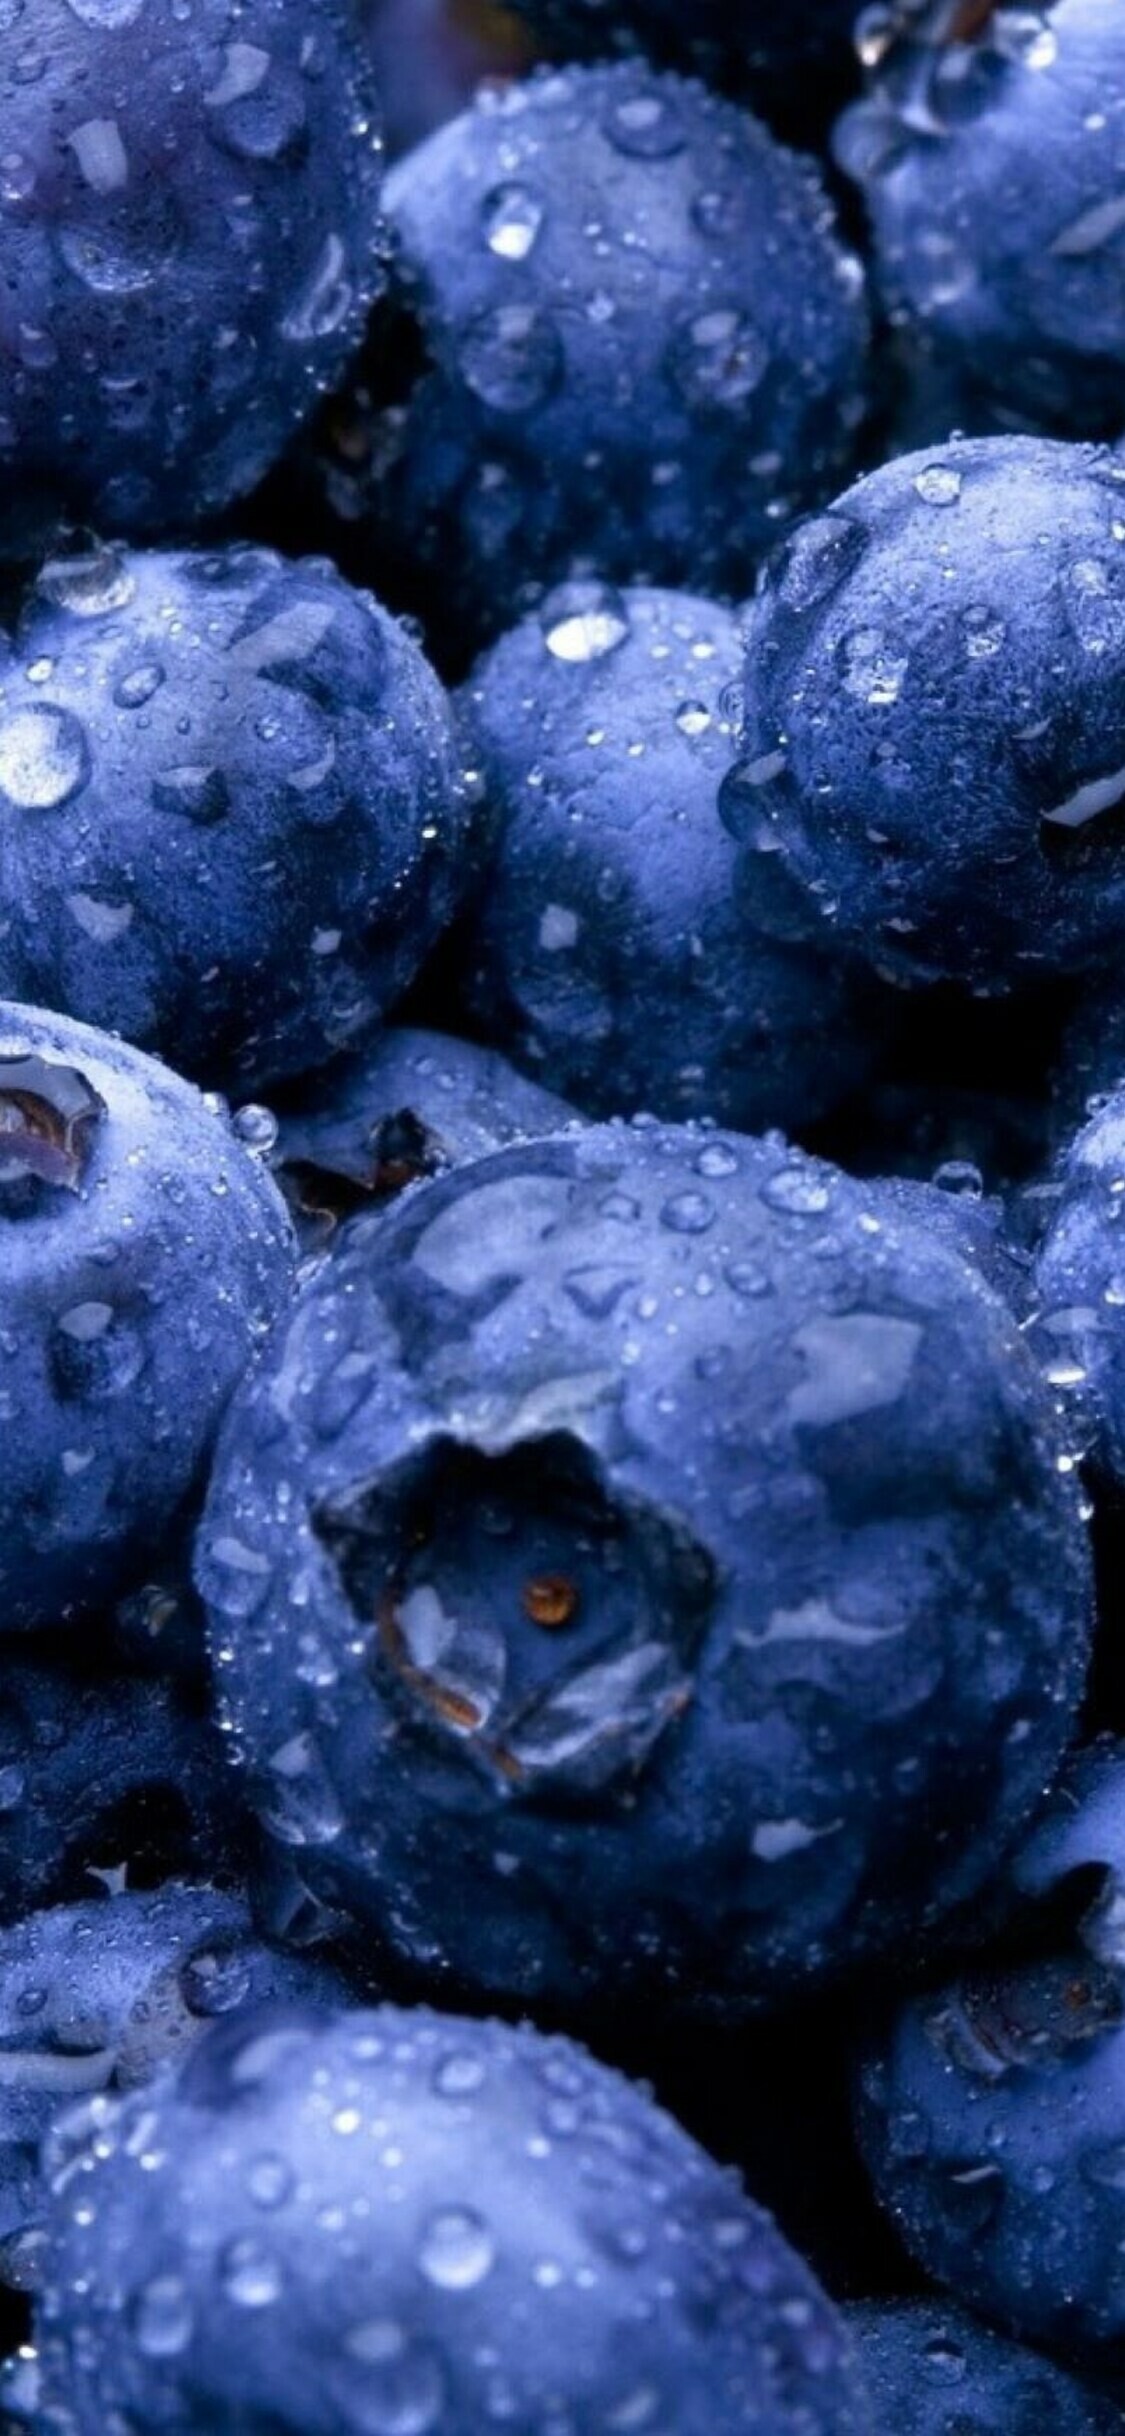 Fruit: Blueberry, Genus Vaccinium, Low in calories but high in nutrients. 1130x2440 HD Wallpaper.